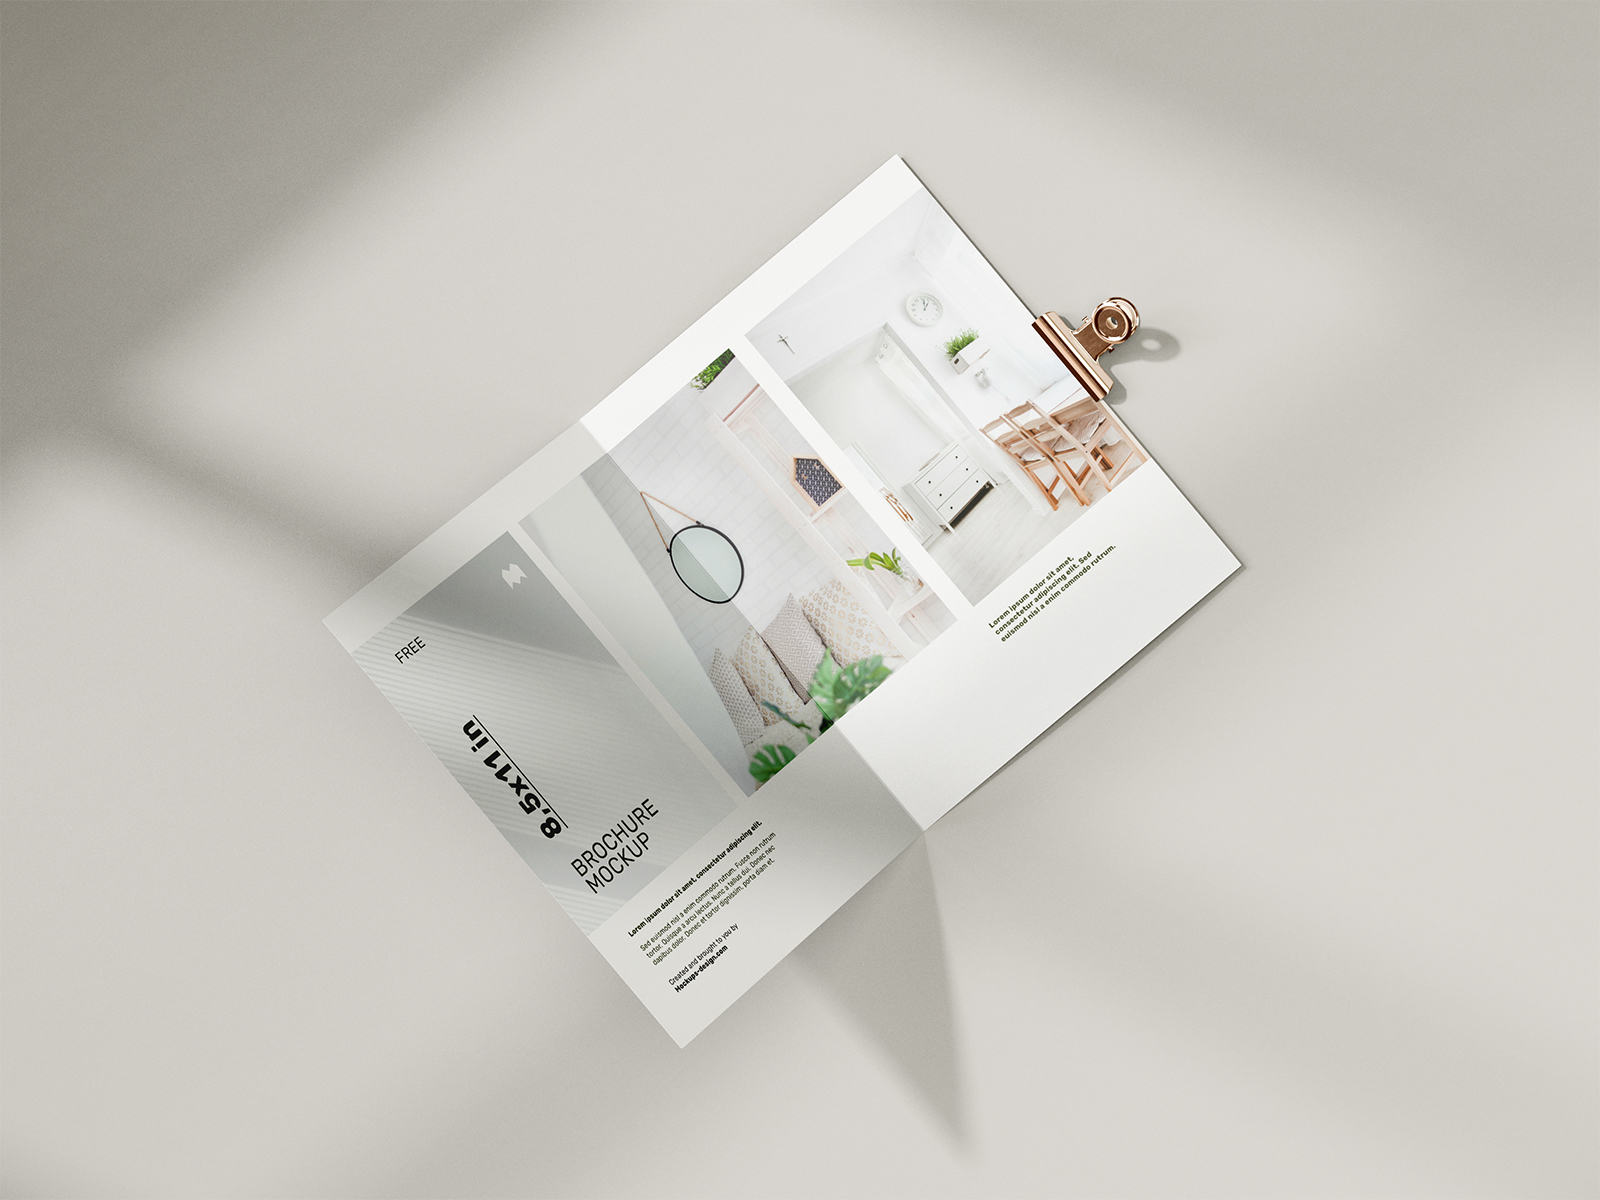 Download Packaging Mockup Download Free Download Free And Premium Psd Mockup Templates And Design Assets PSD Mockup Templates